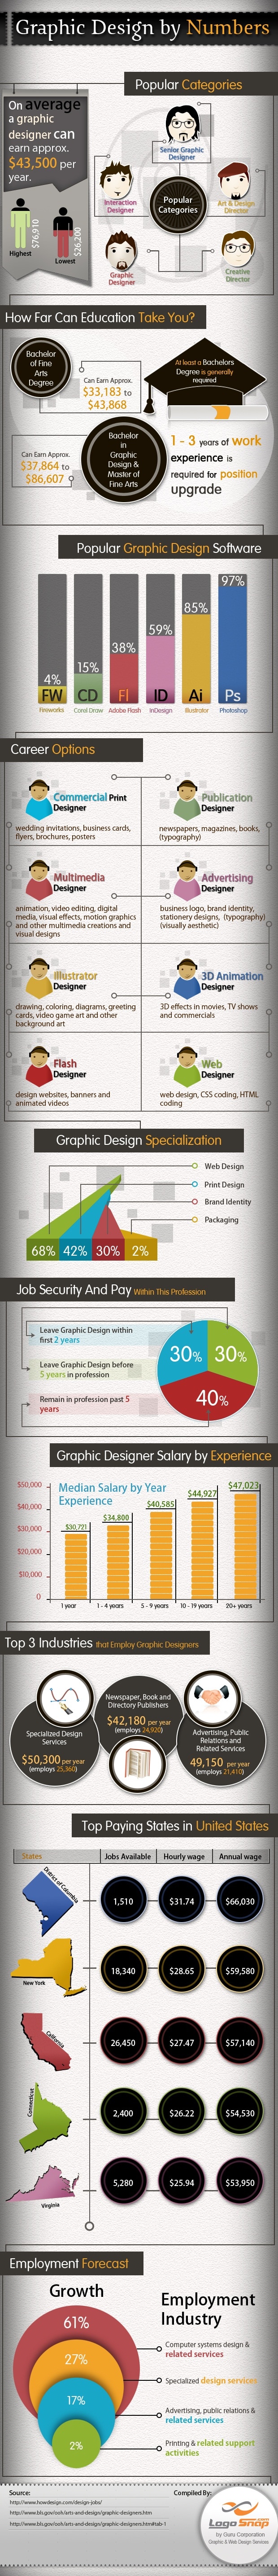 graphic-design-career-numbers-infographic